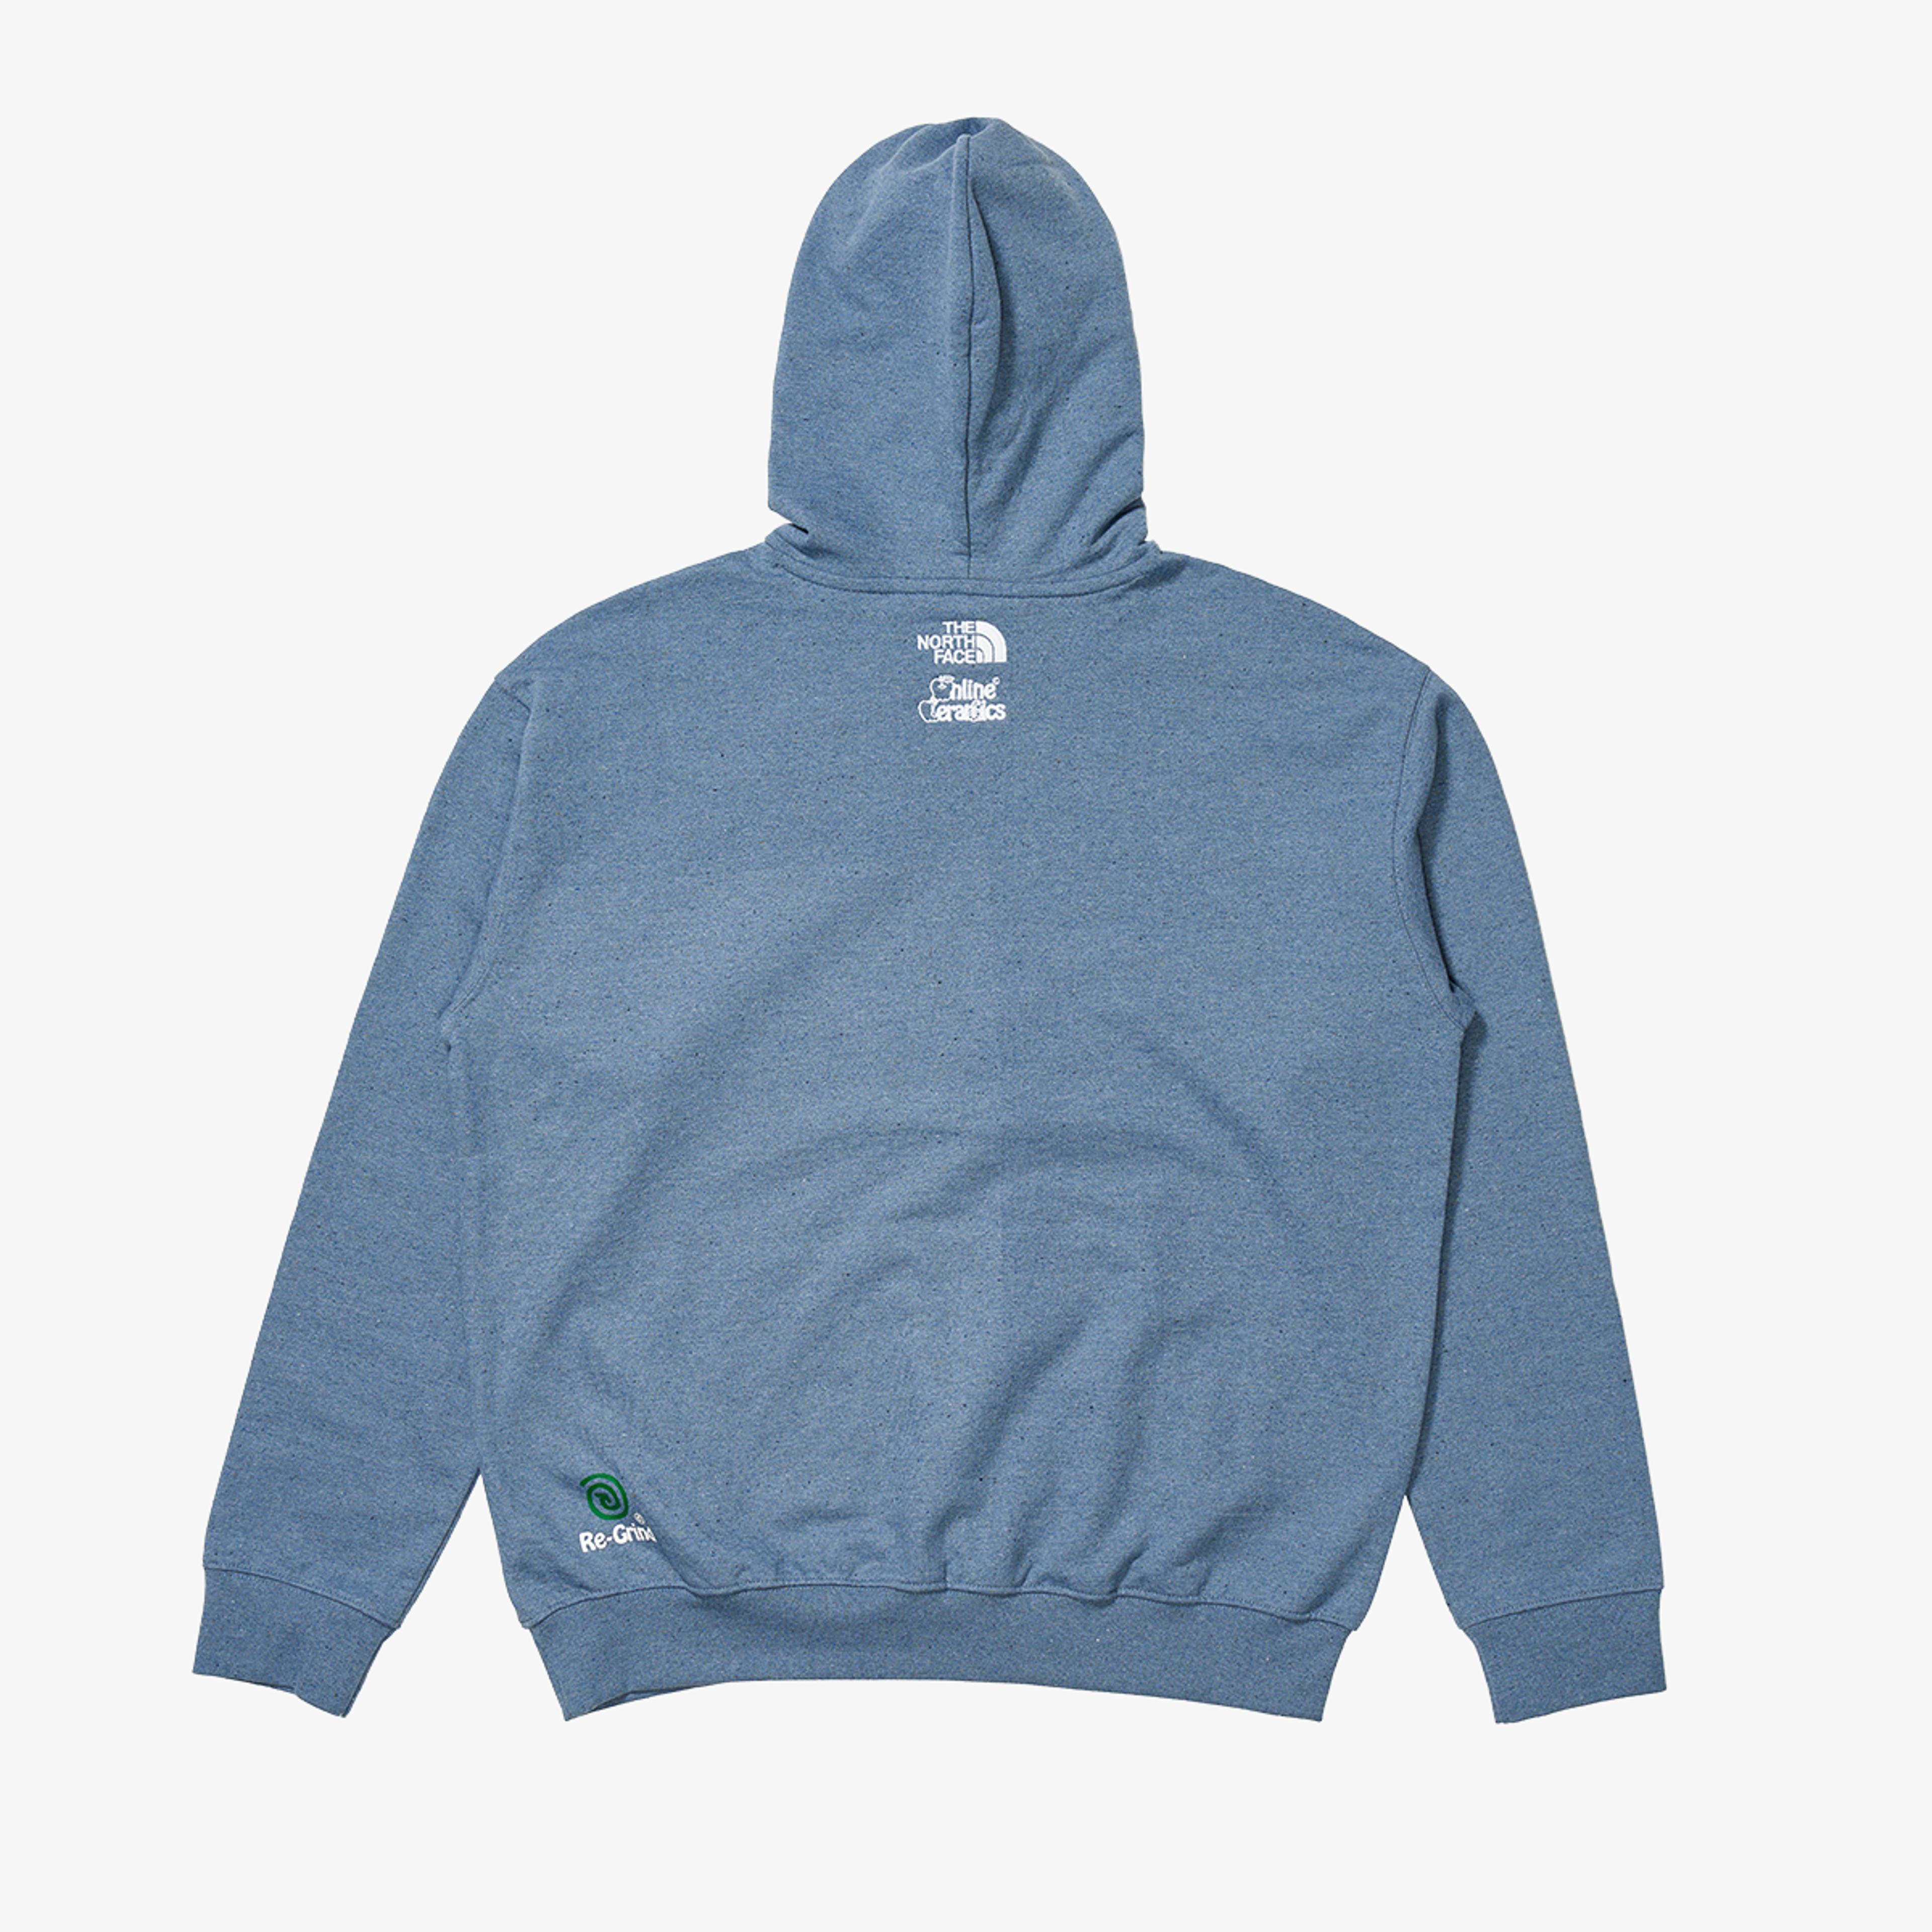 Alternate View 1 of The North Face x Online Ceramics Graphic Hoody (Blue Regrind)